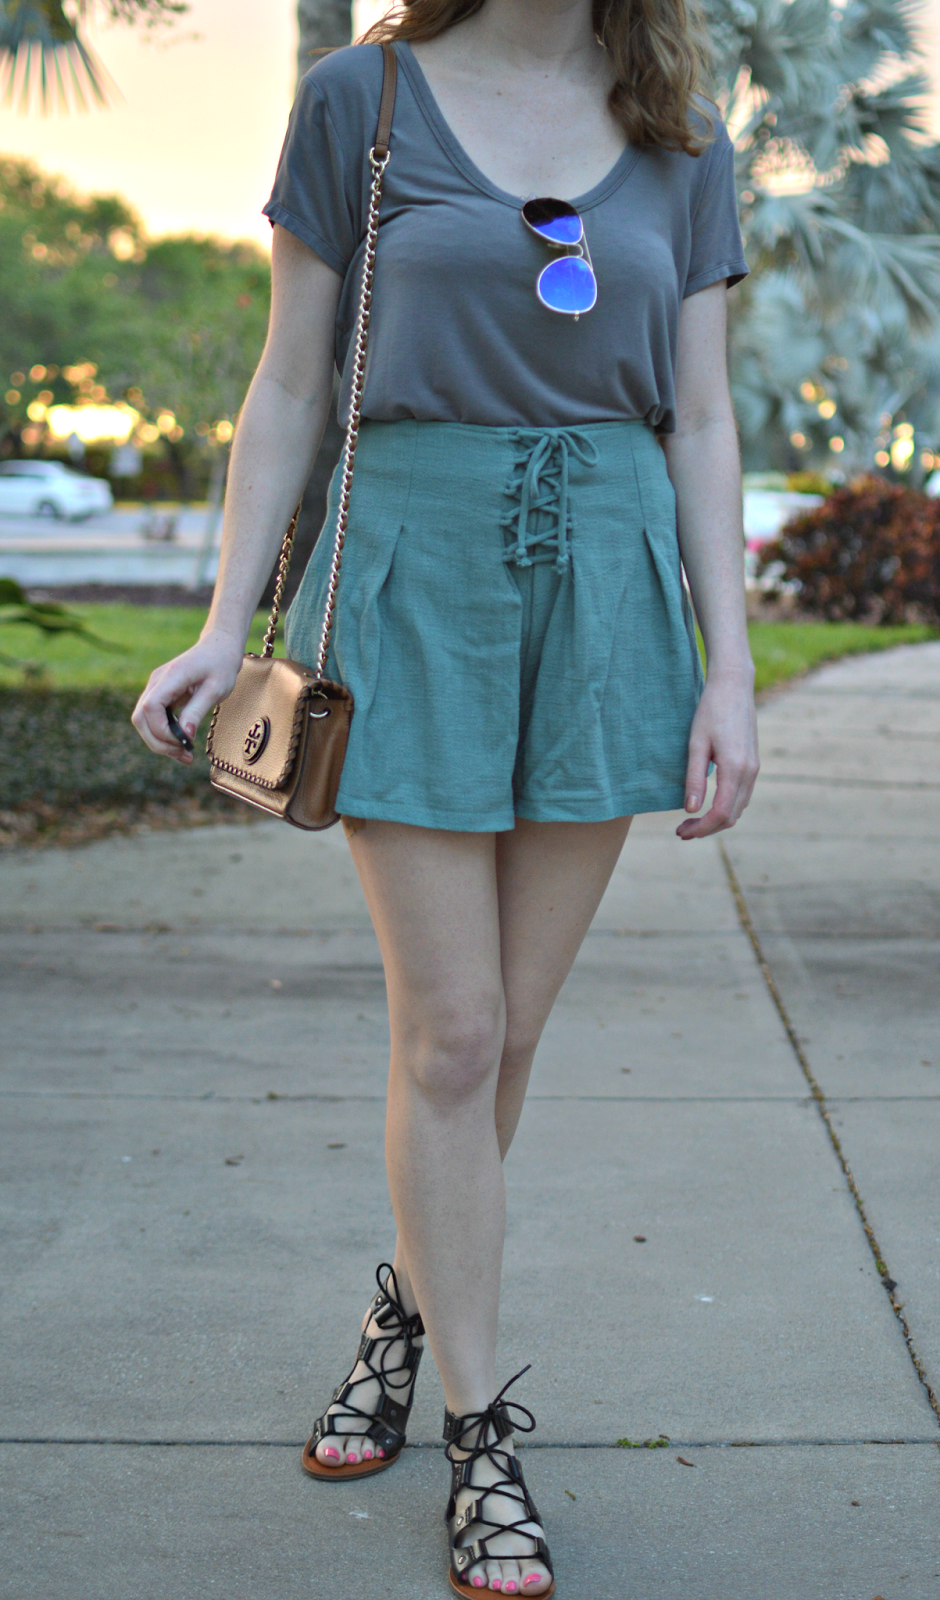 Lace-Up Shorts + New Tory Burch Bag - Affordable by Amanda